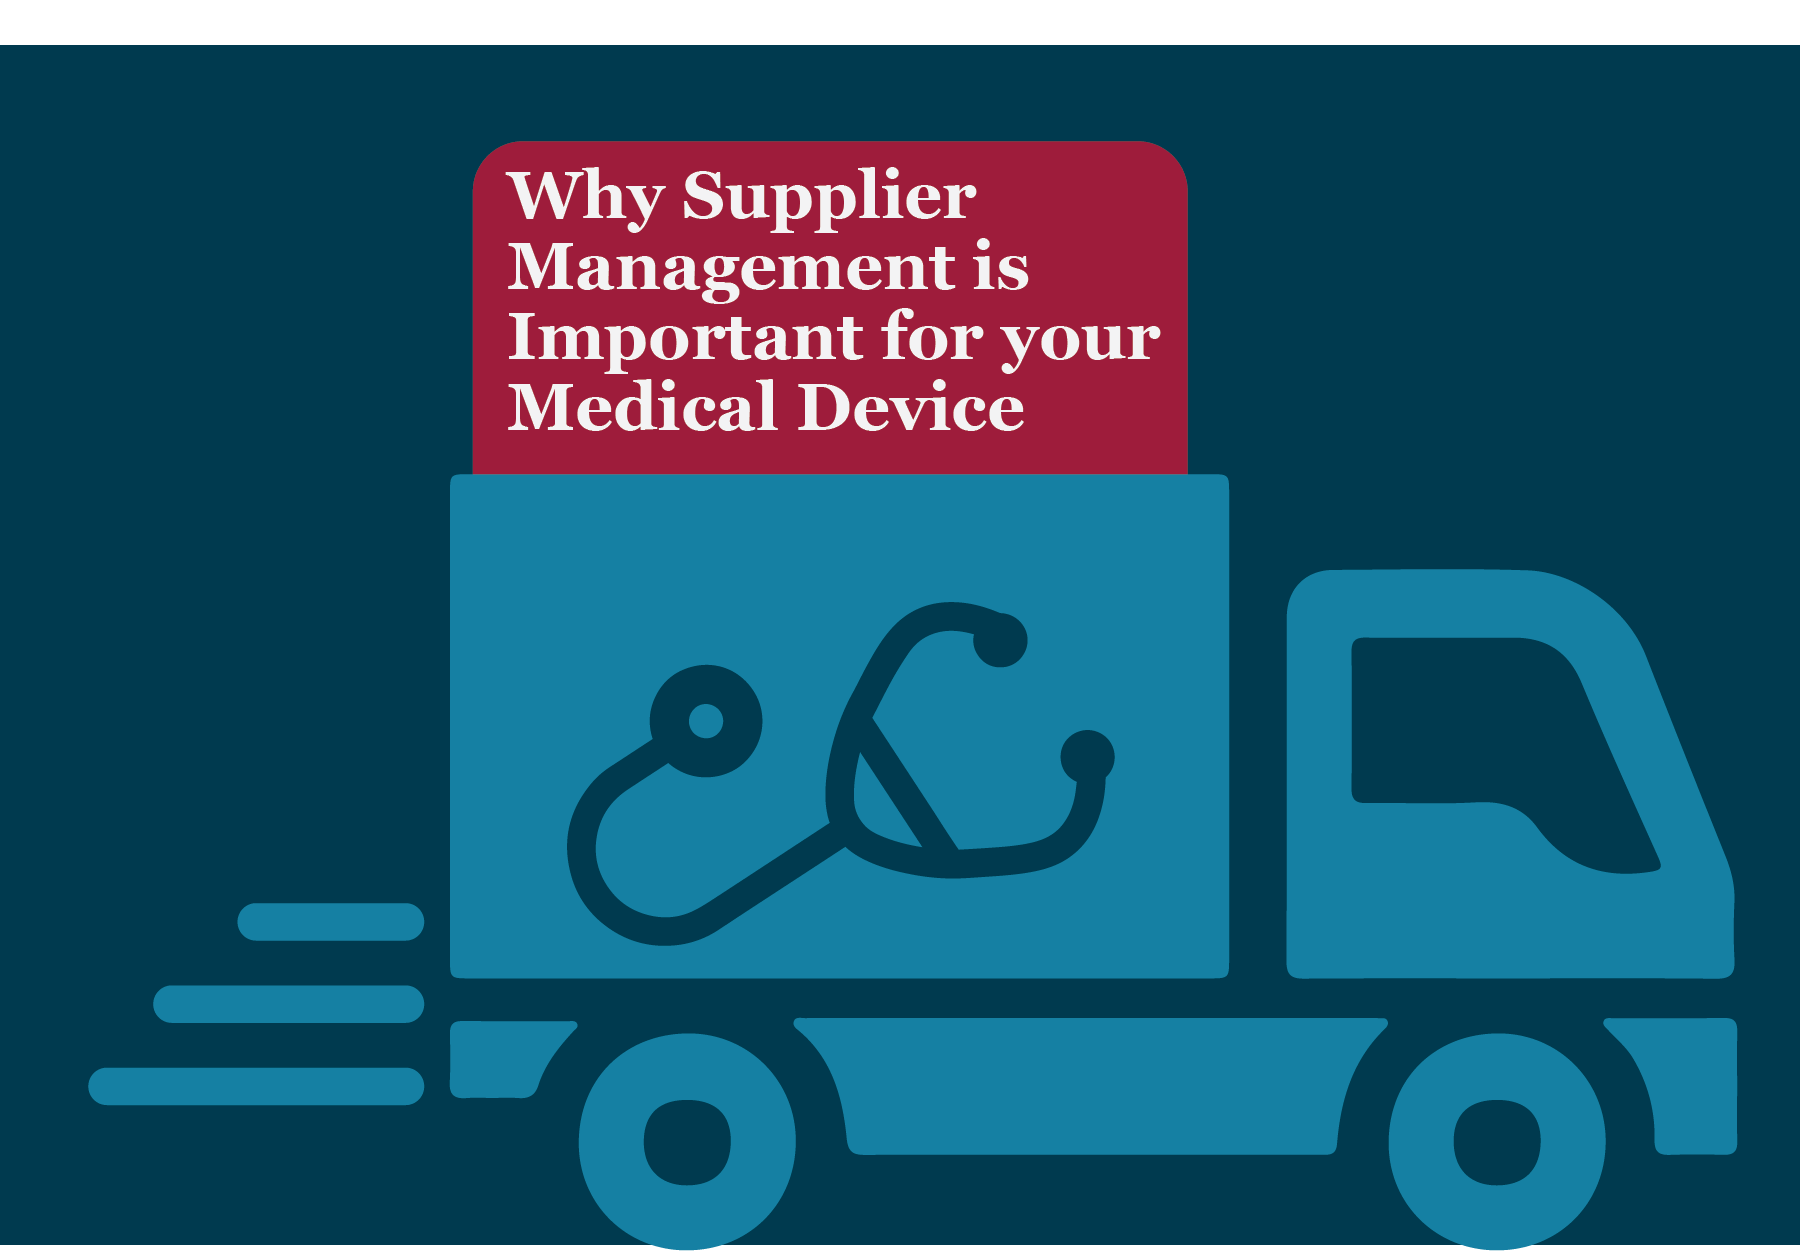 Why Supplier Management is Important for your Medical Device